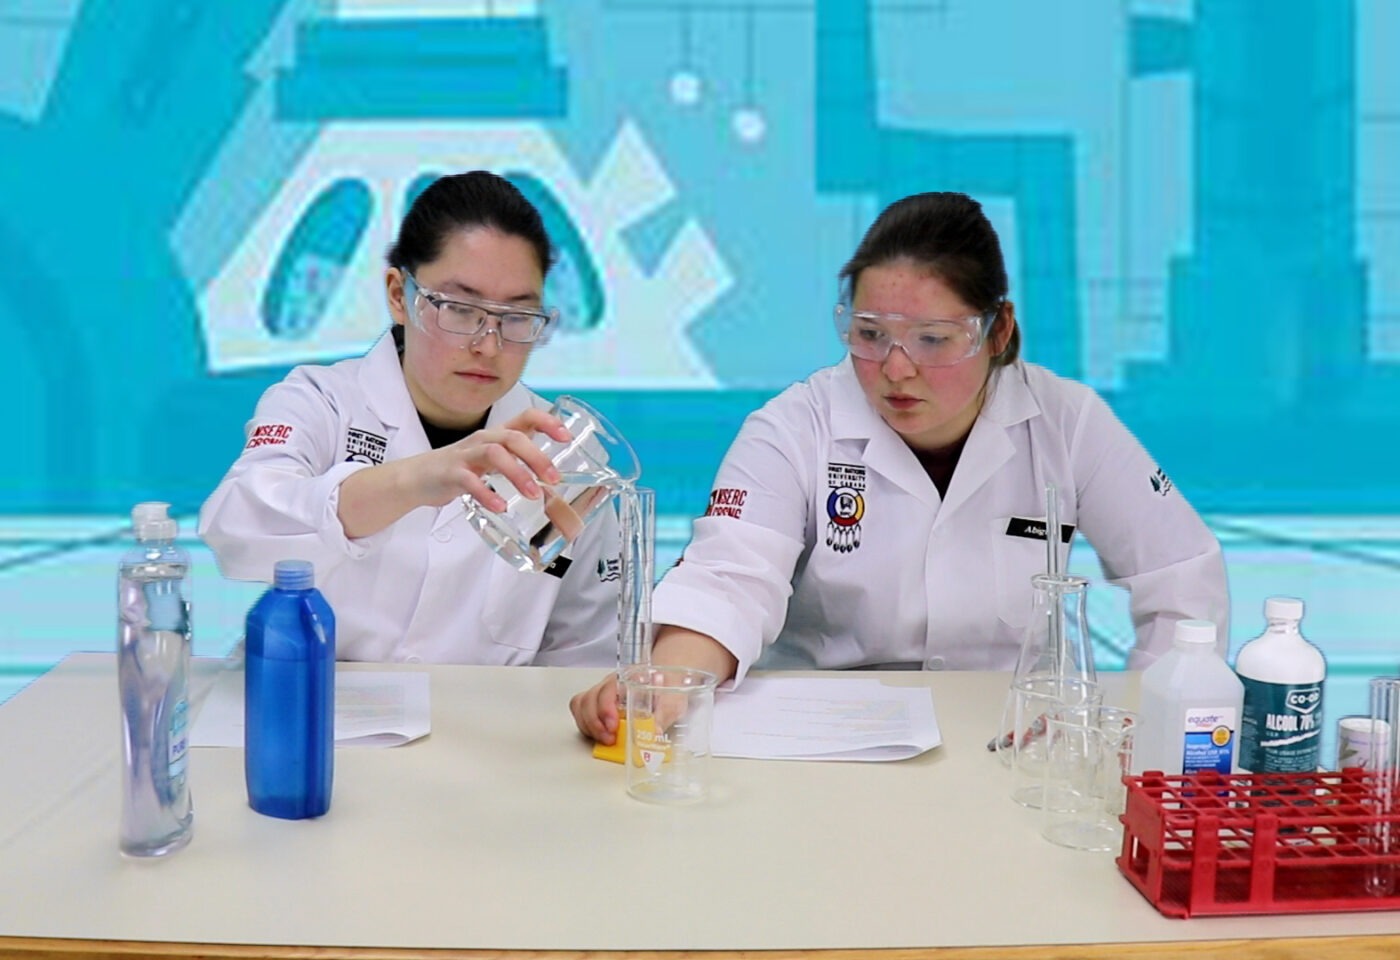 National Science Laboratory Video Lessons for Aboriginal Youth